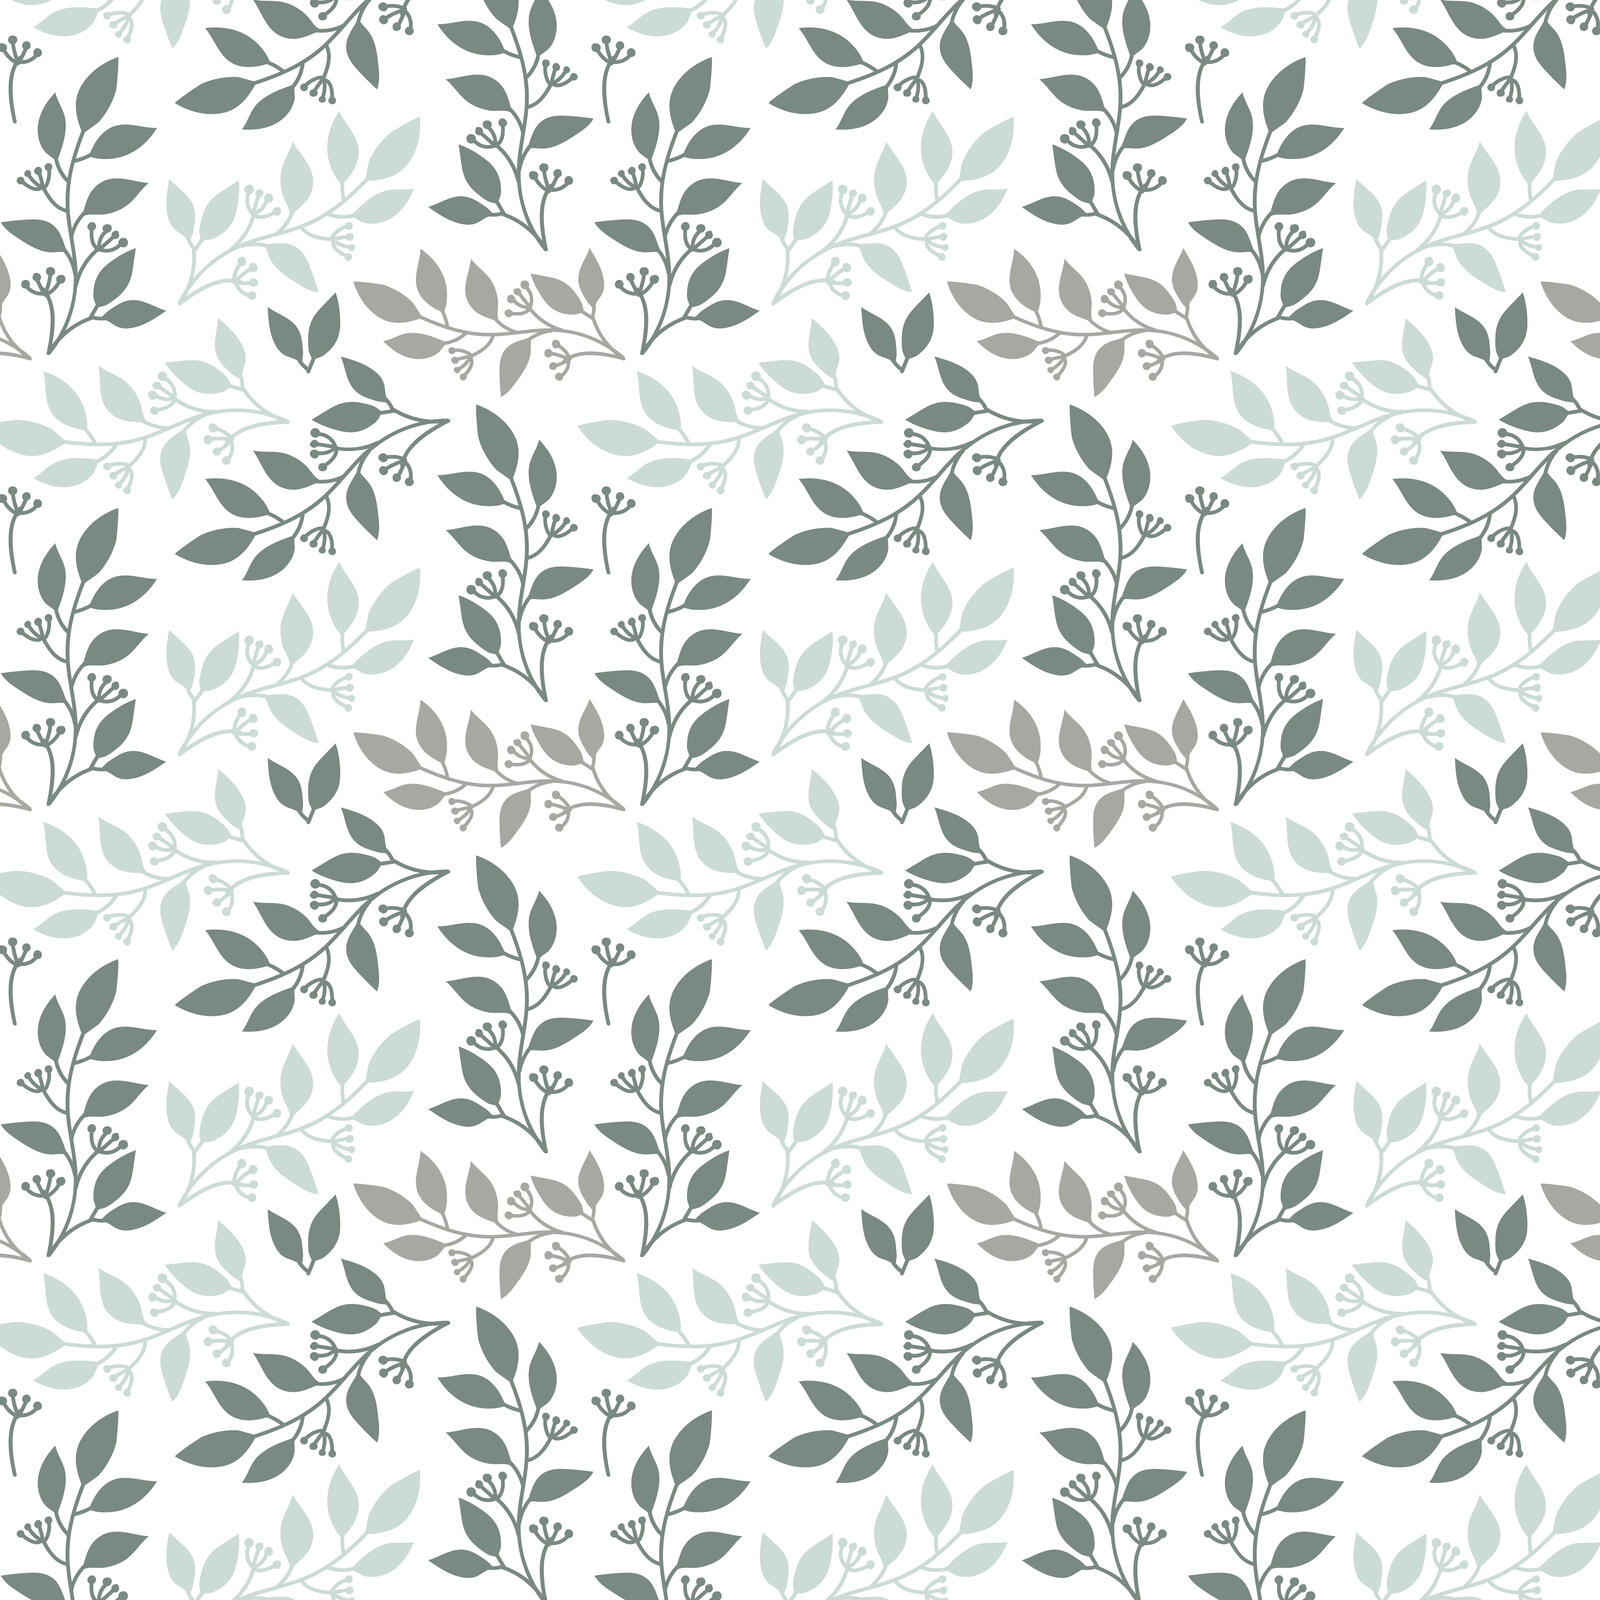 Wallpapers background pattern leaves on the desktop